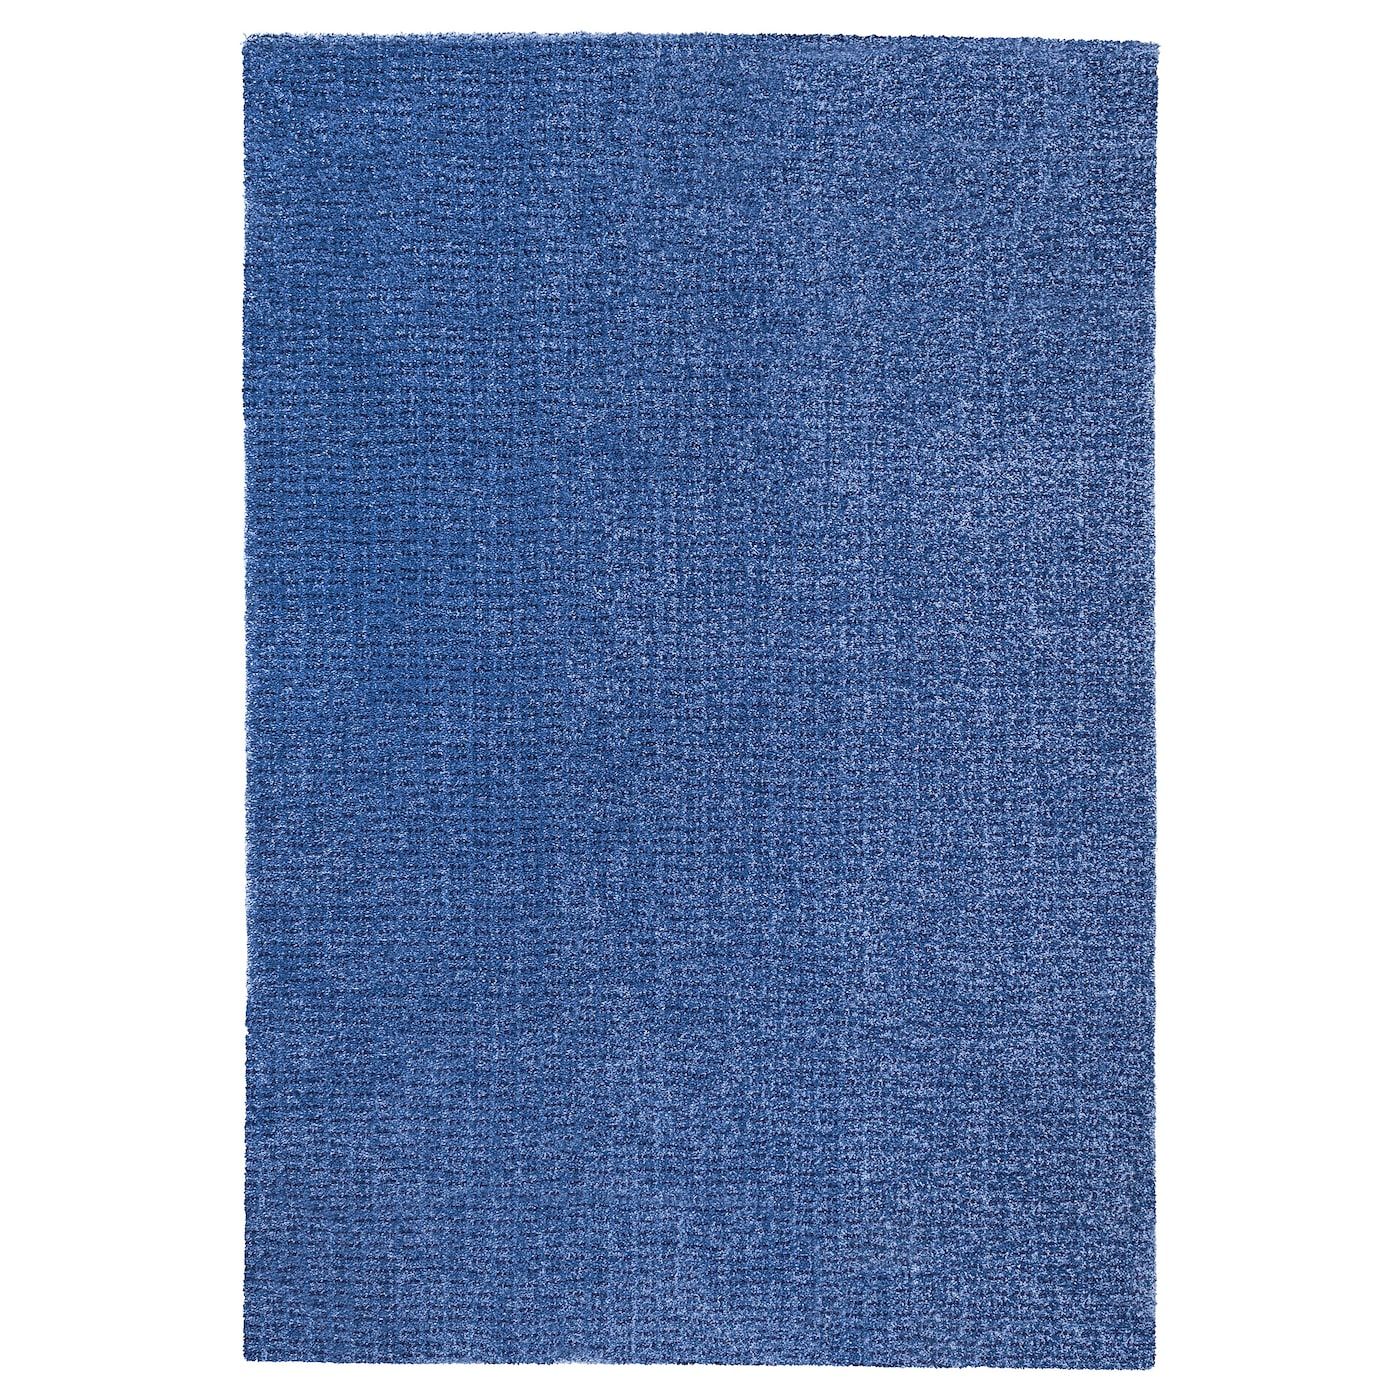 Langsted Dark Blue, Rug, Low Pile, 133x195 Cm – Ikea Inside Blue Rugs (View 12 of 15)